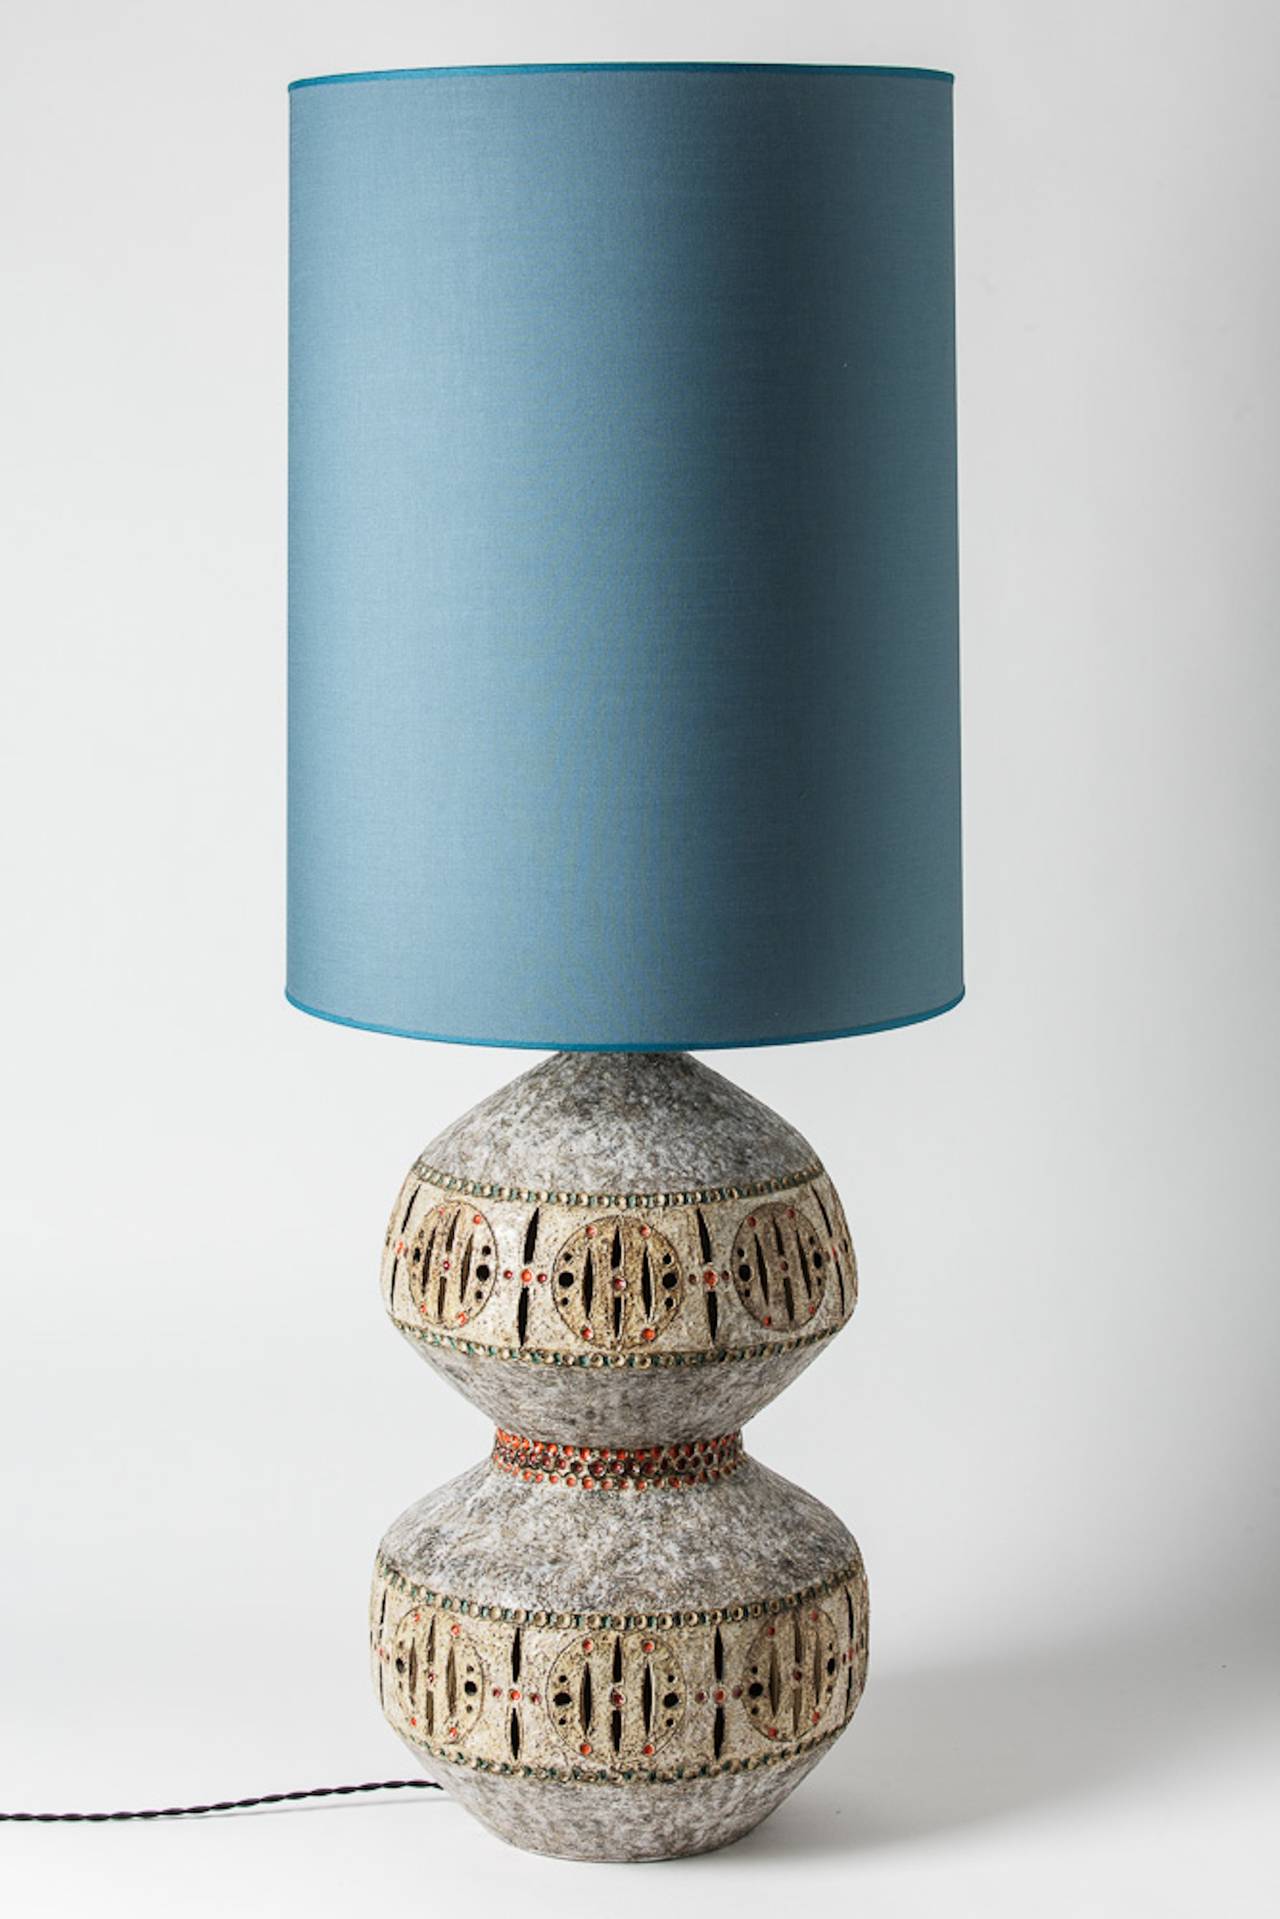 An extraordinary and important ceramic lamp by Raphaël Giarrusso.
Unique piece.
Signed piece,
circa 1970.